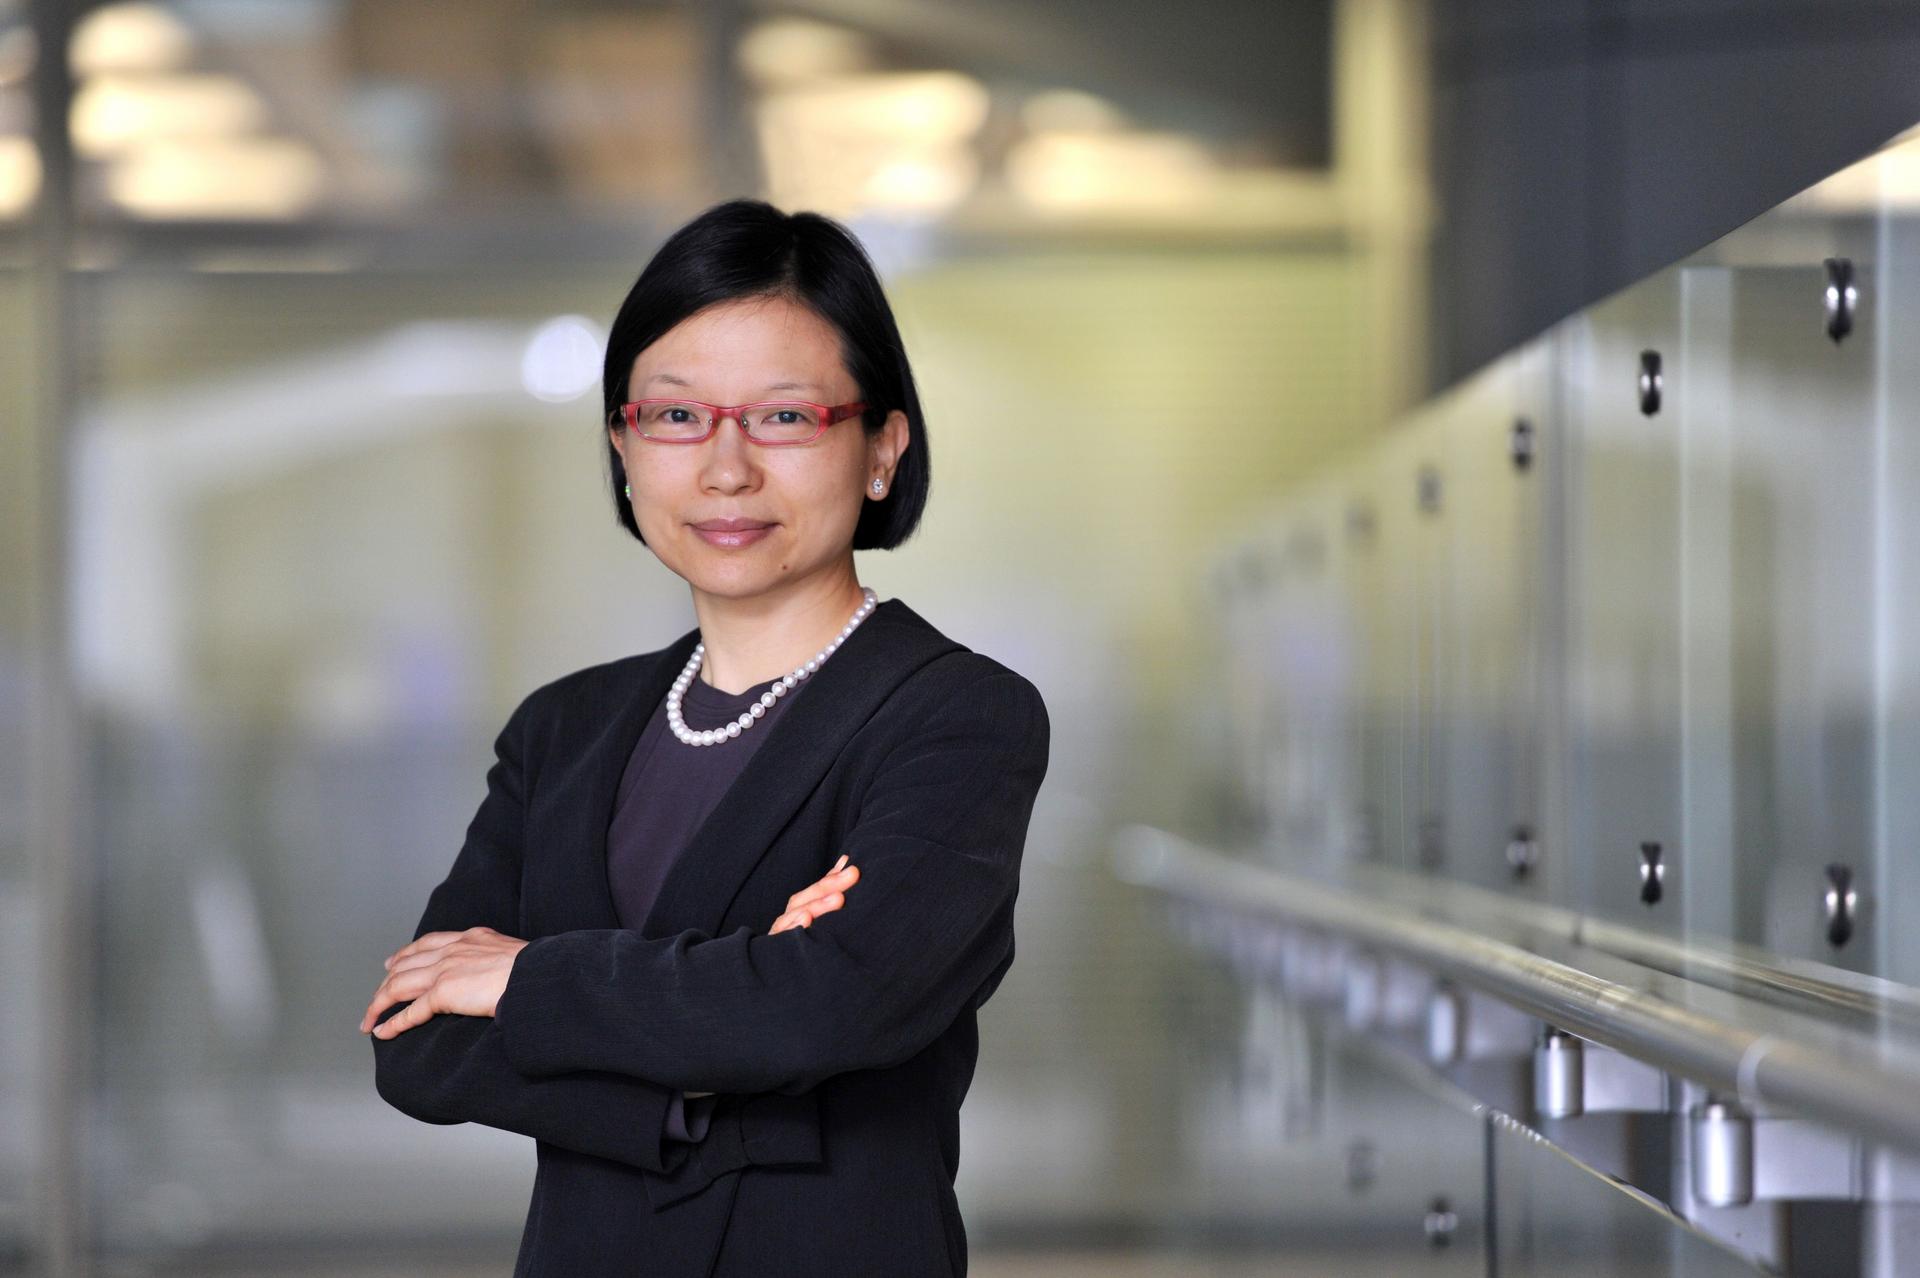 ANITA FUNG: THE HSBC CHIEF EXECUTIVE OFFICER WHO BROKE THROUGH THE GLASS CEILING